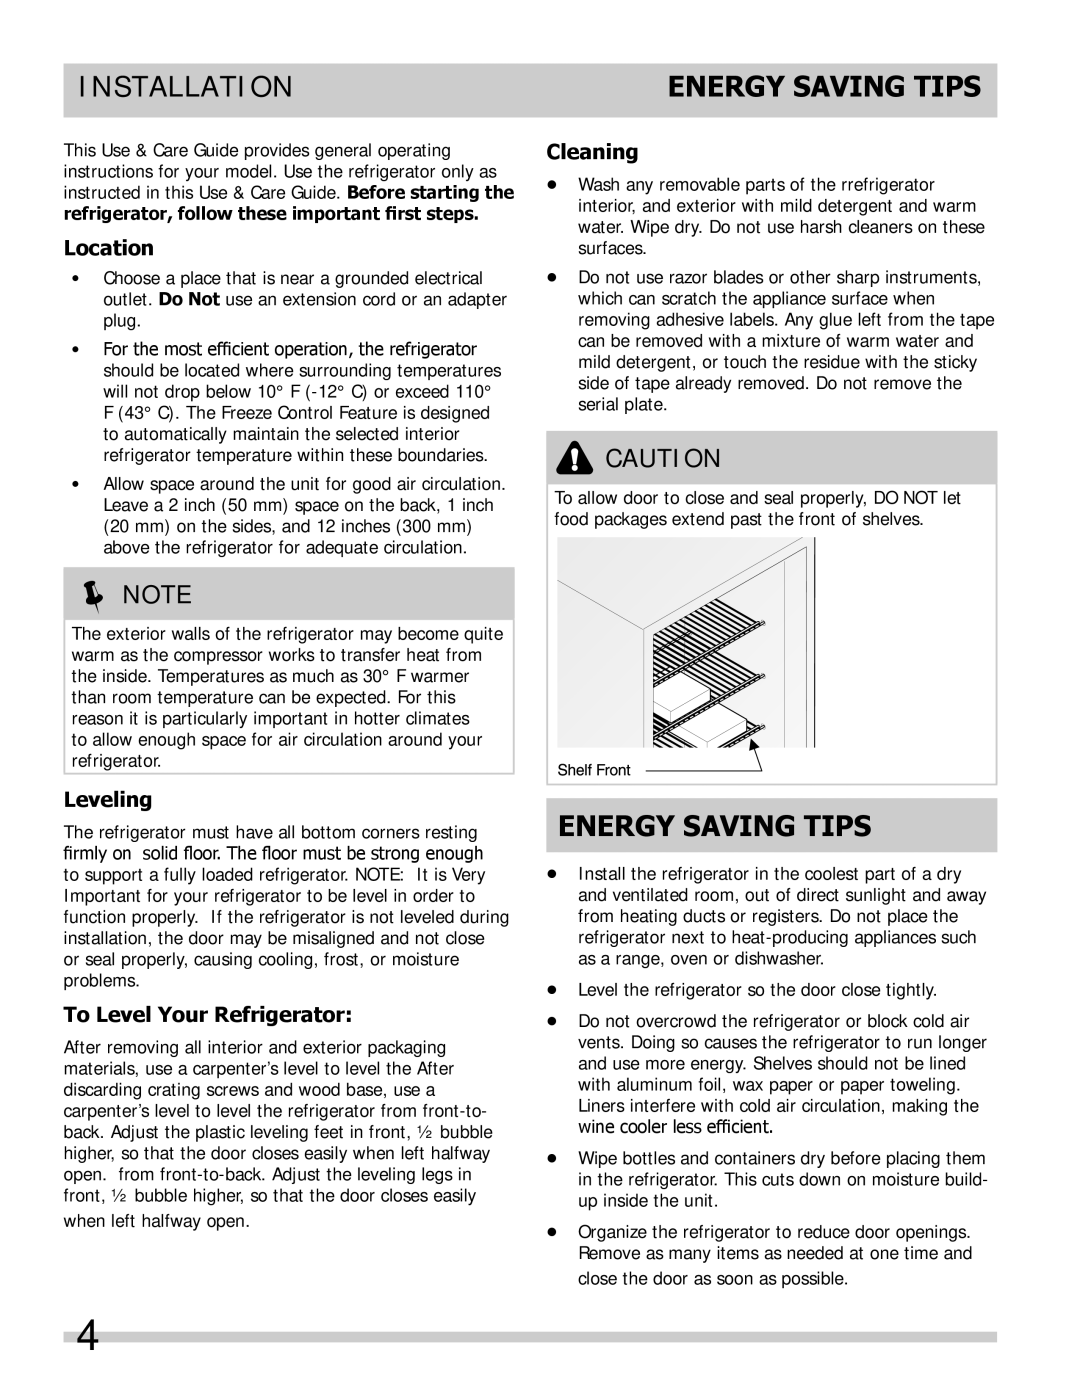 Frigidaire FFPT10F3MB Installation, Energy Saving Tips,  Note, Location, Leveling, To Level Your Refrigerator, Cleaning 